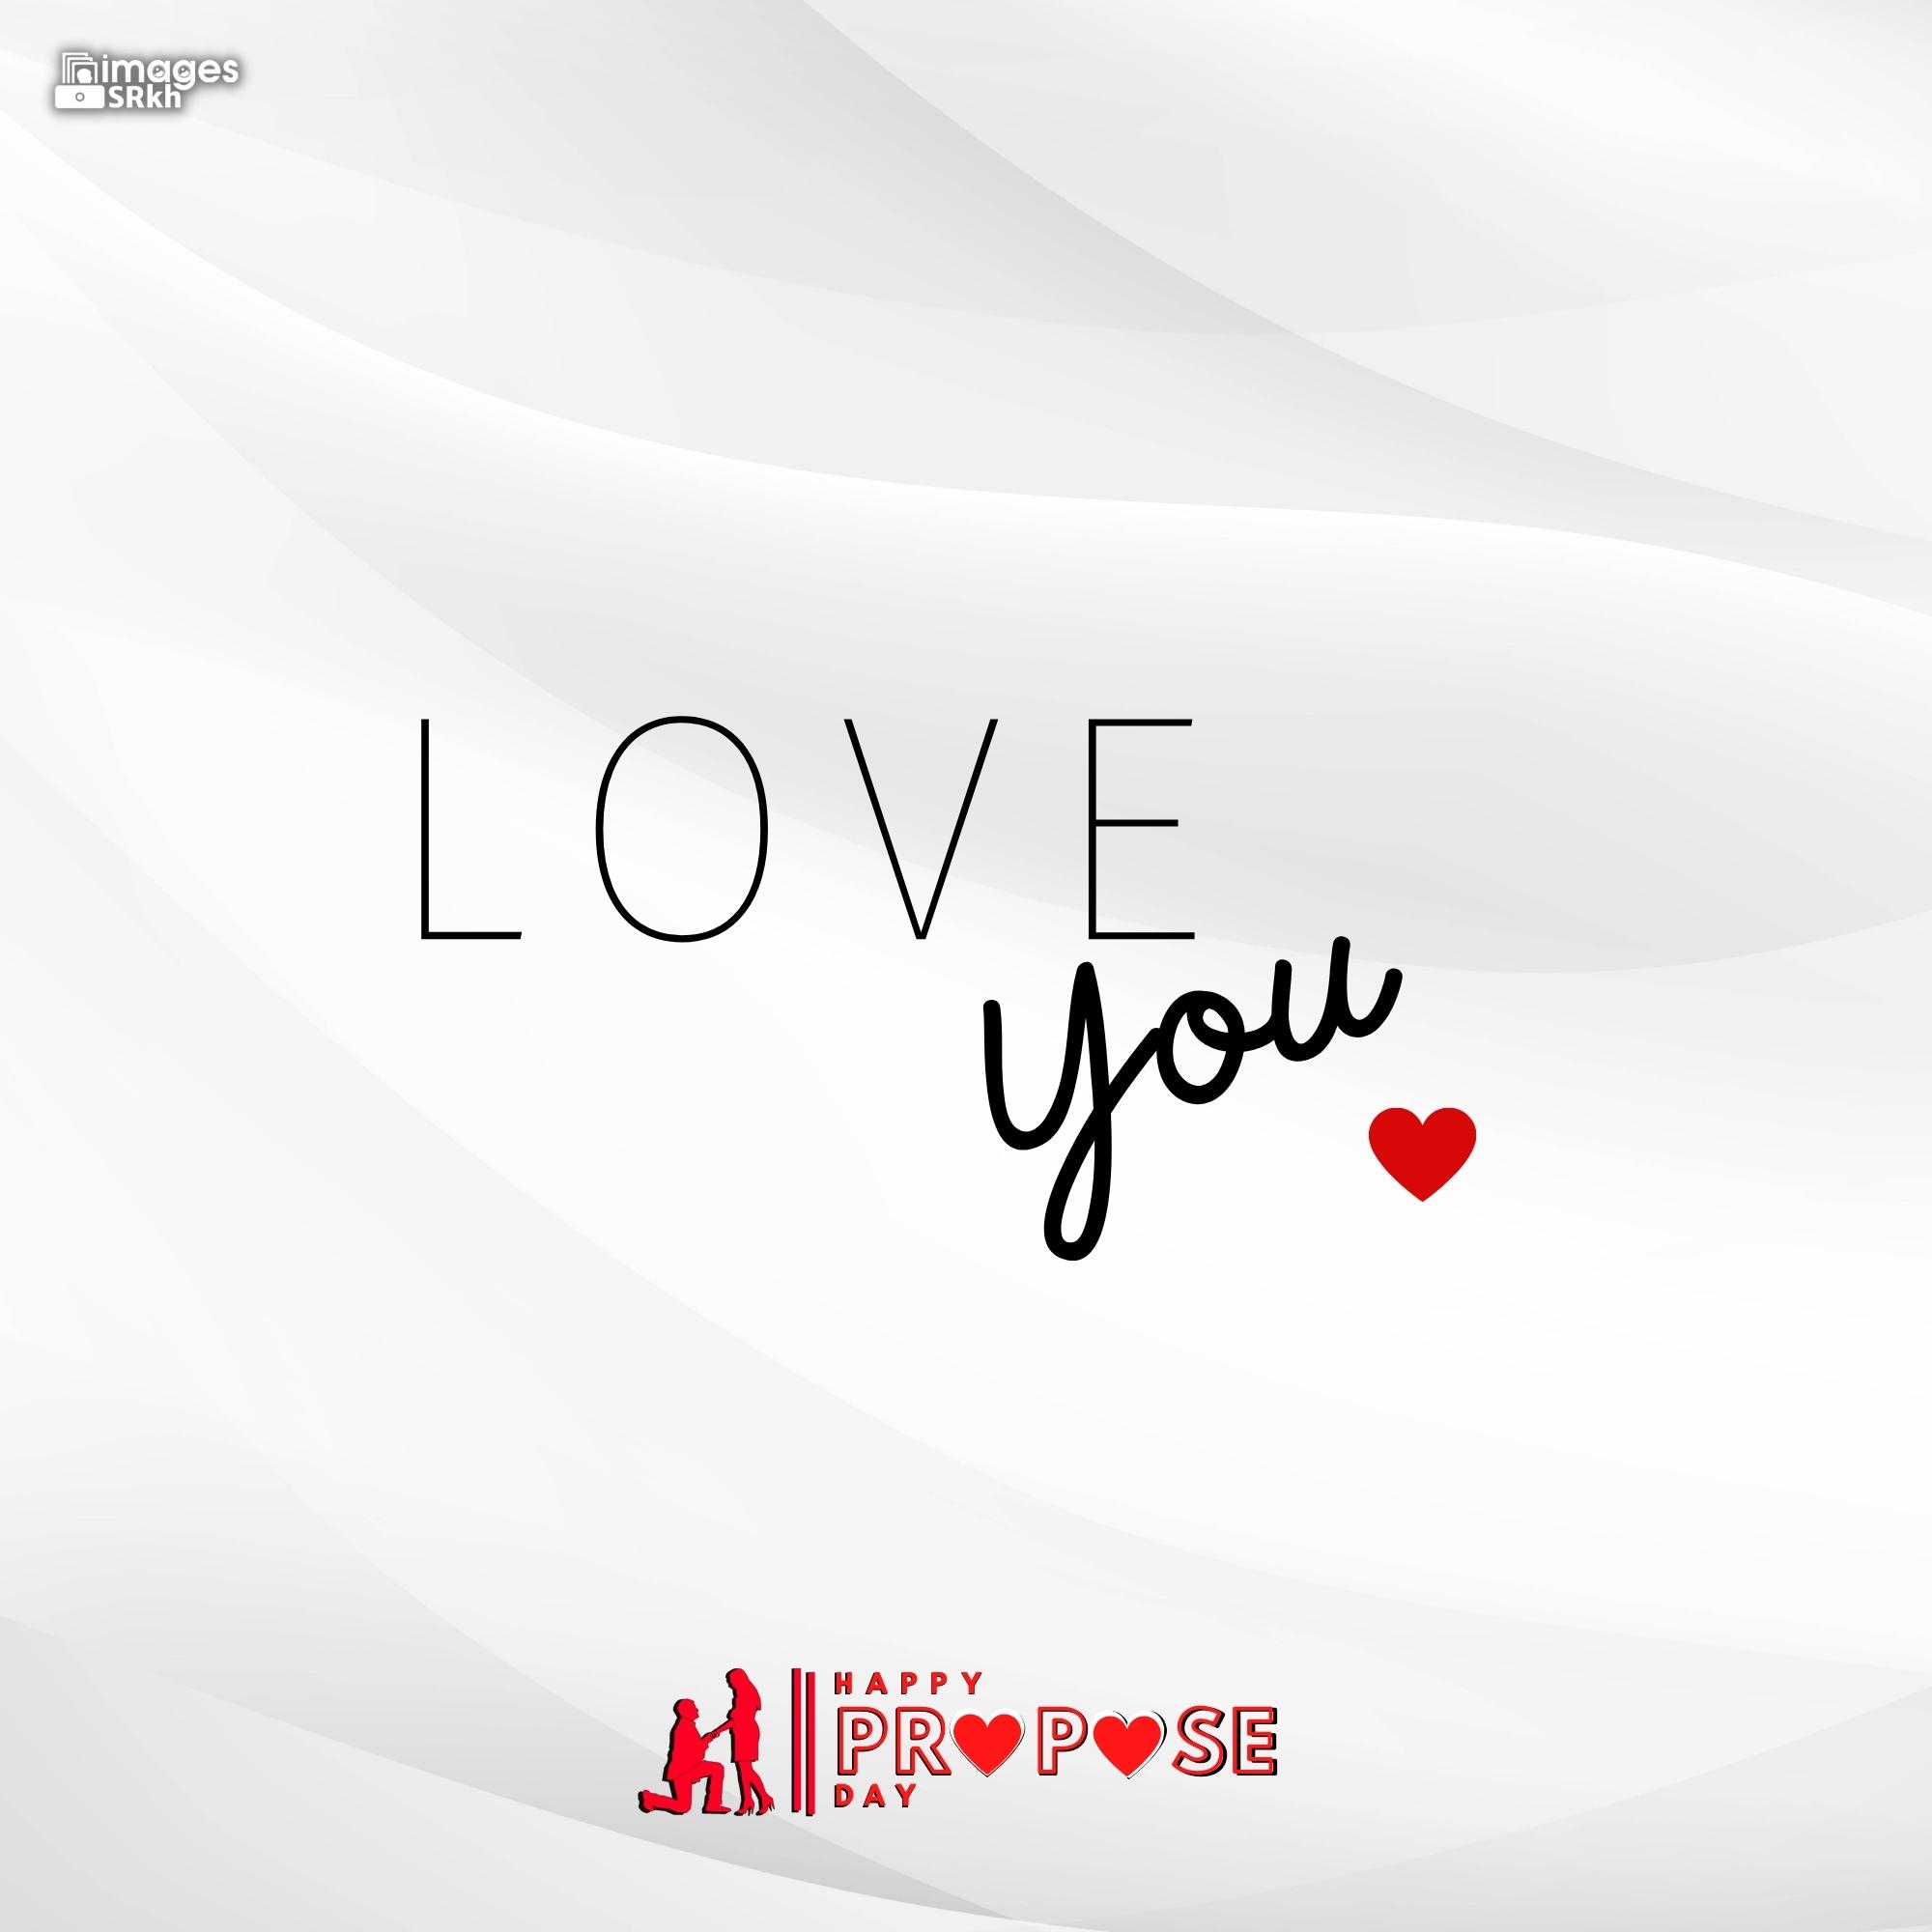 Happy Propose Day Images | 352 | I LOVE YOU